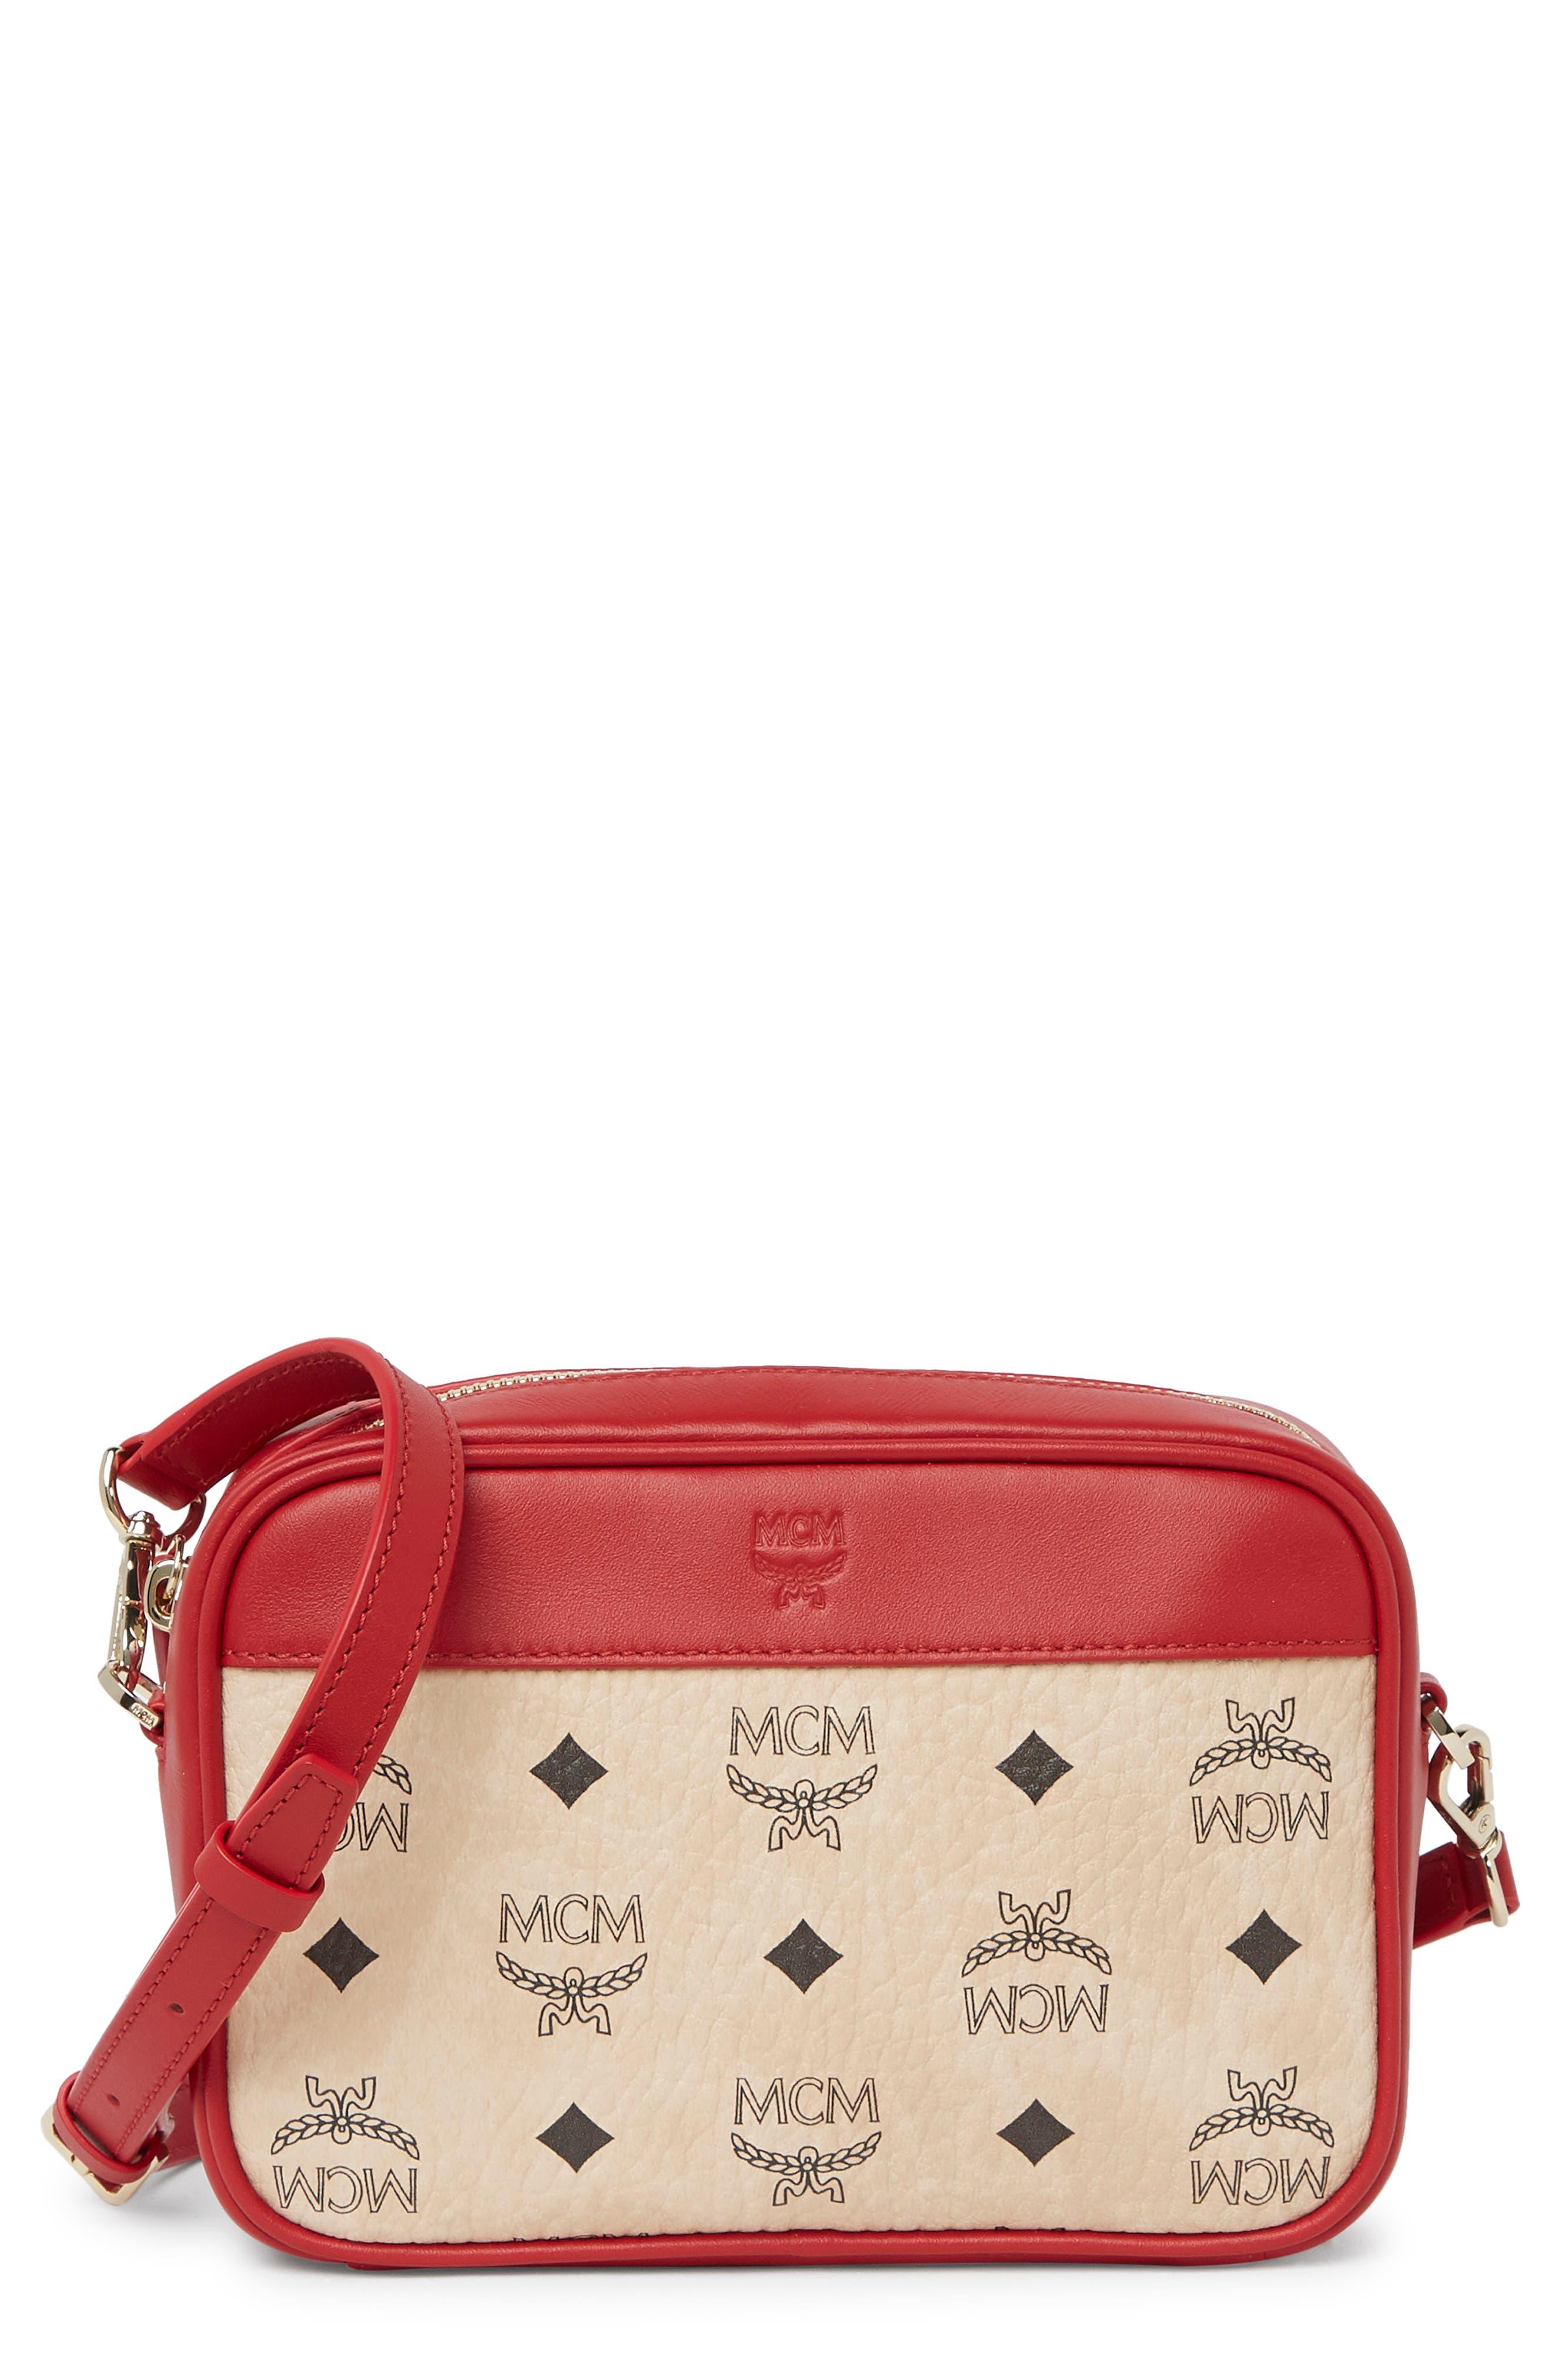 Share 52+ mcm bags nordstrom super hot - in.cdgdbentre